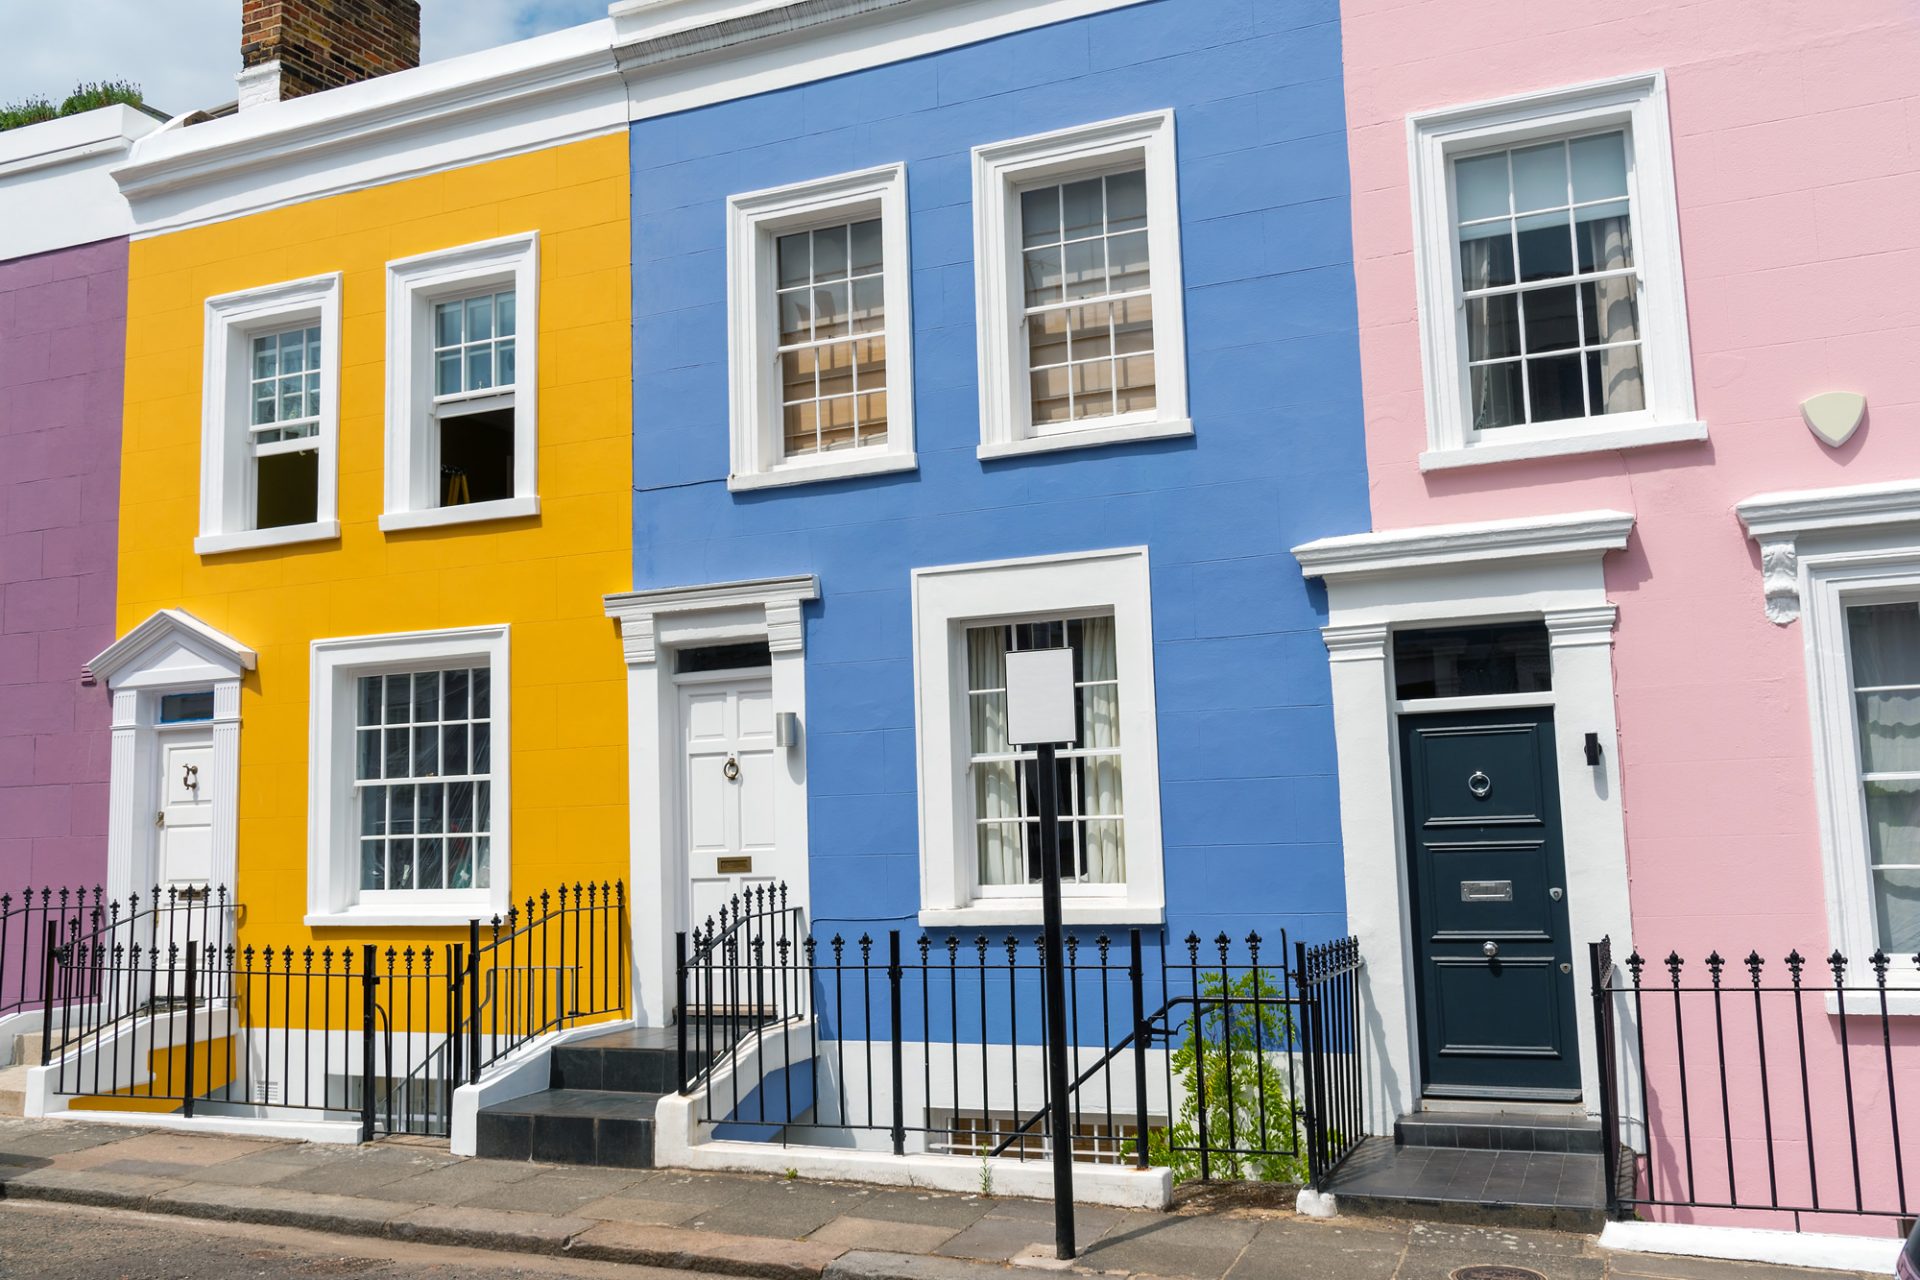 Painted houses, redecorated in Farnham, Guildford & Surrey.